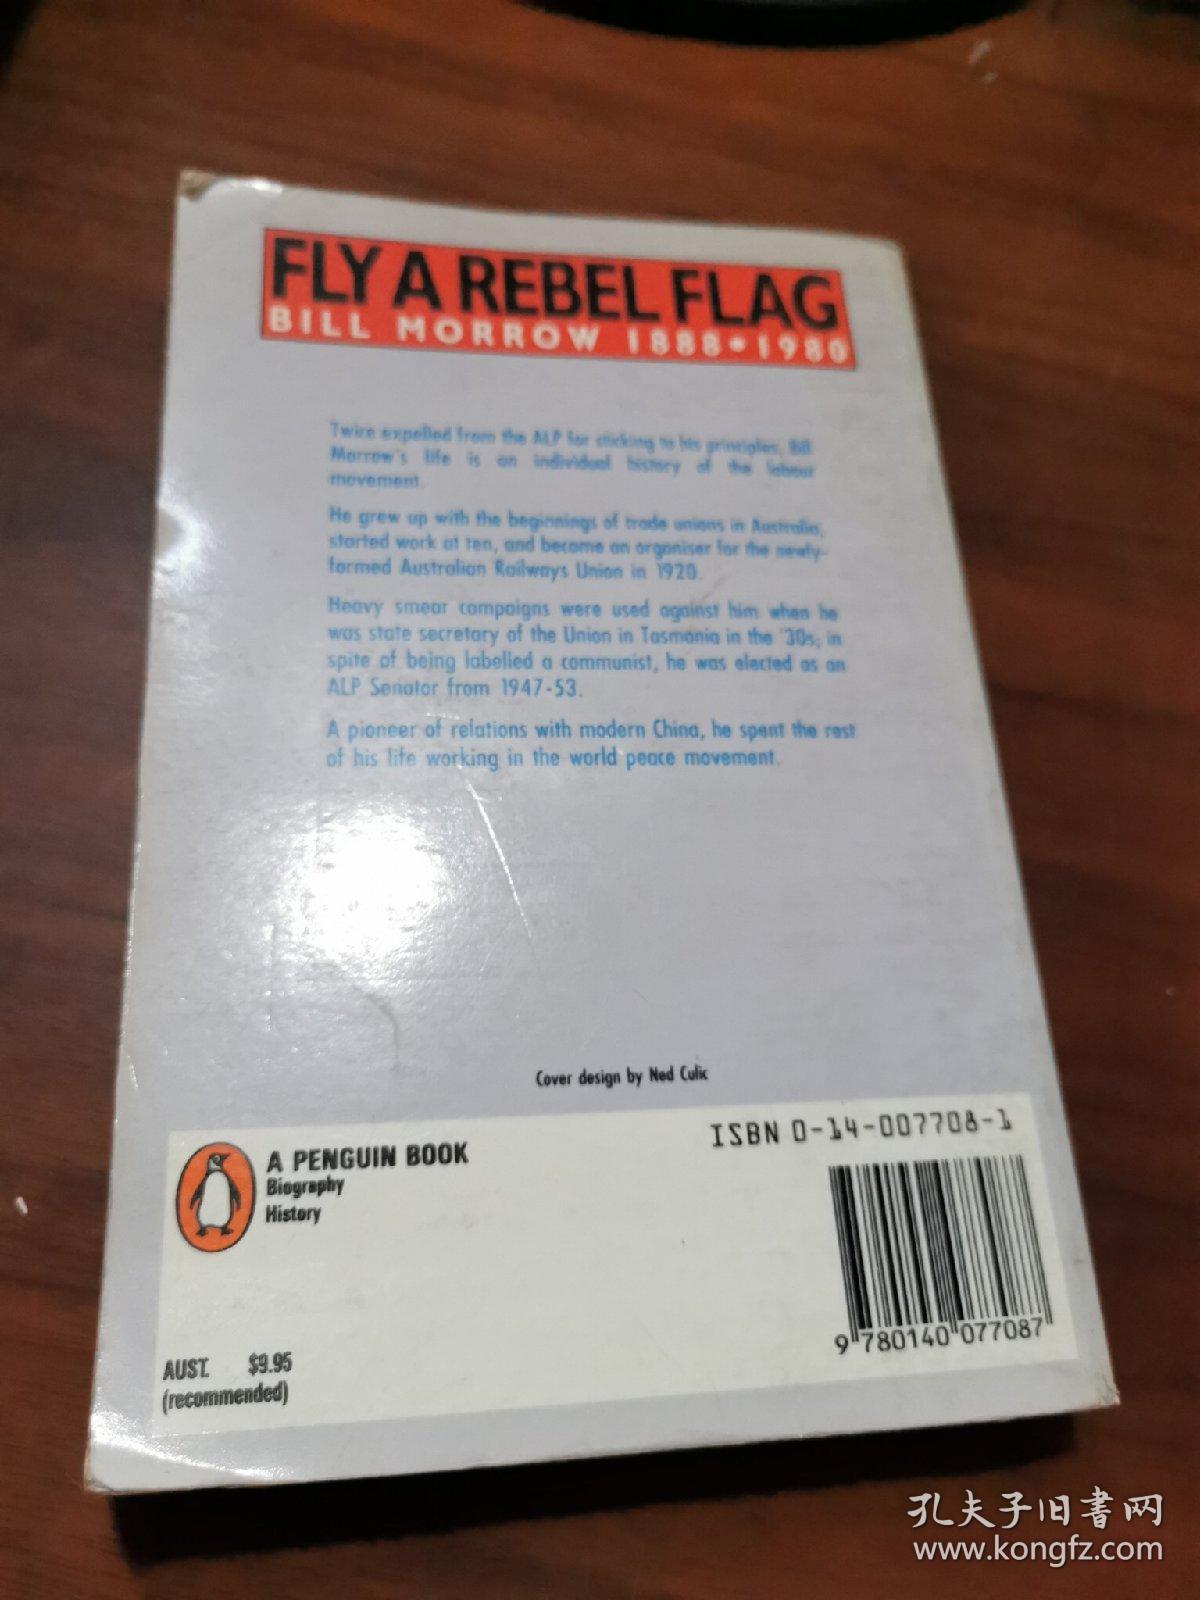 AUDREY JOHNSON  FLY A REBEL FLAG BILL MORROW 1888.1980 In and out of the Labor Party-Politics with Principles  LABOR SENATE CANDIDATE